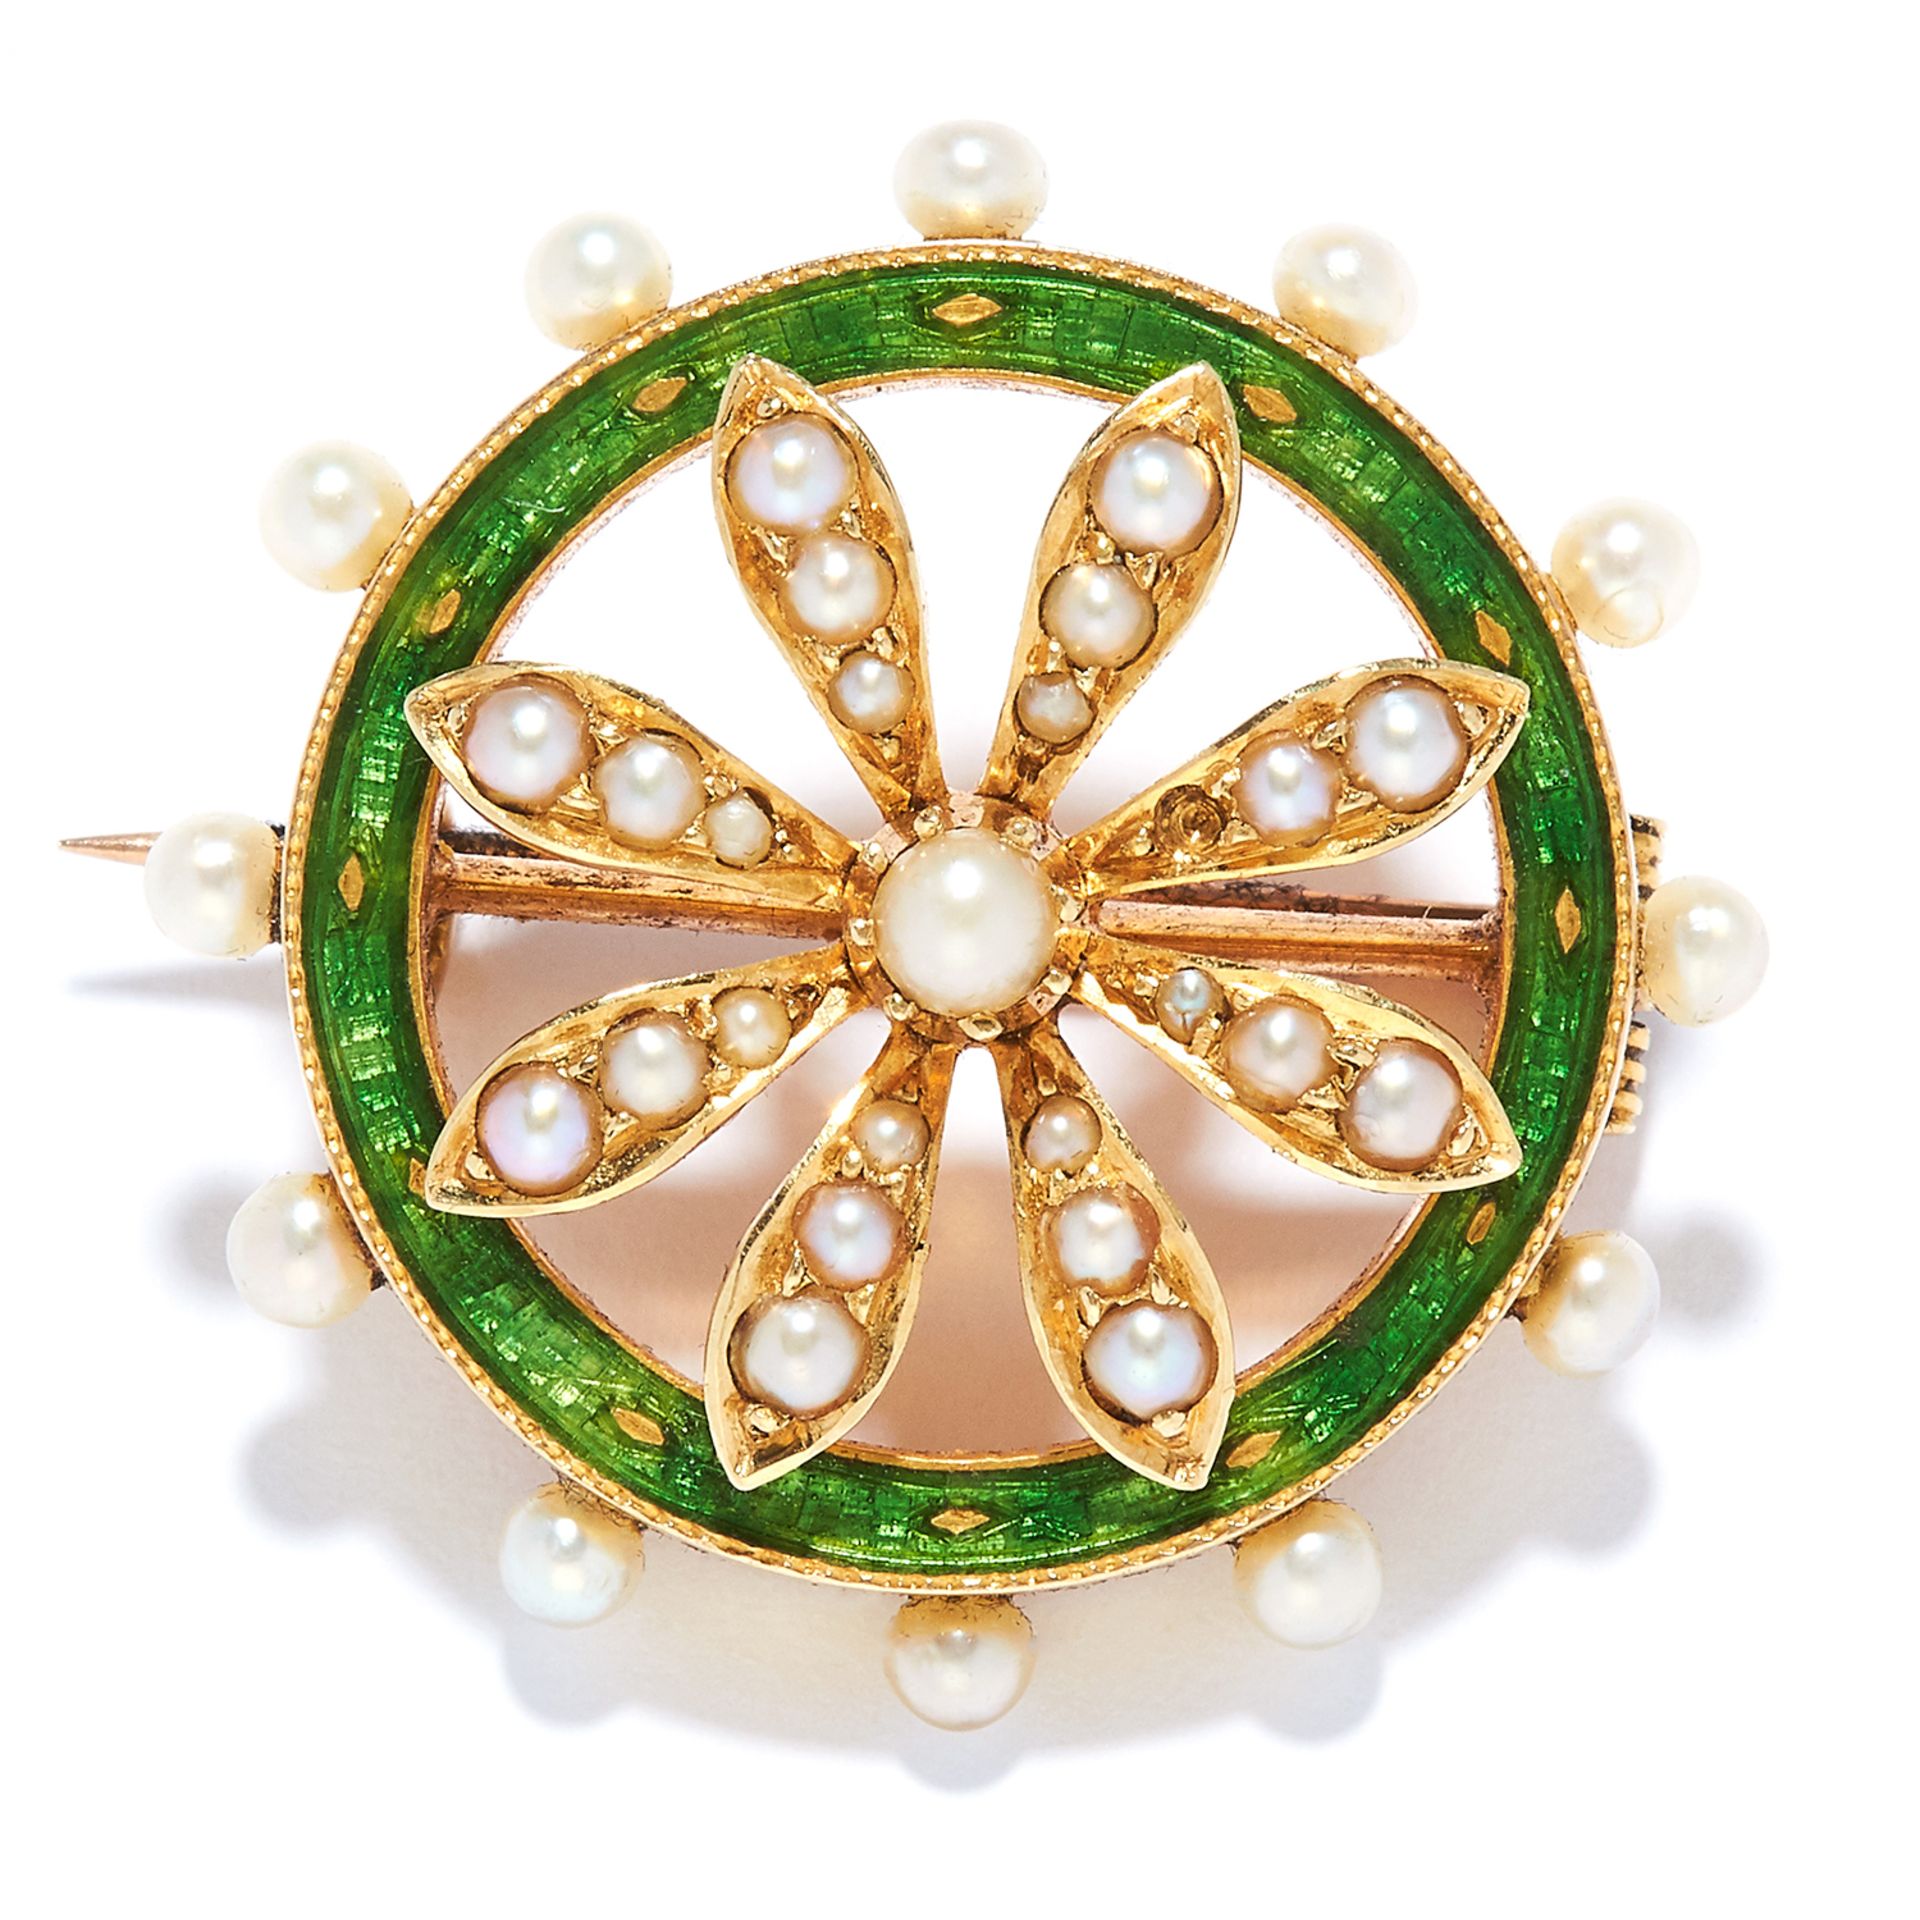 ANTIQUE PEARL AND ENAMEL BROOCH in 15ct yellow gold, in circular foliate motif, set with green